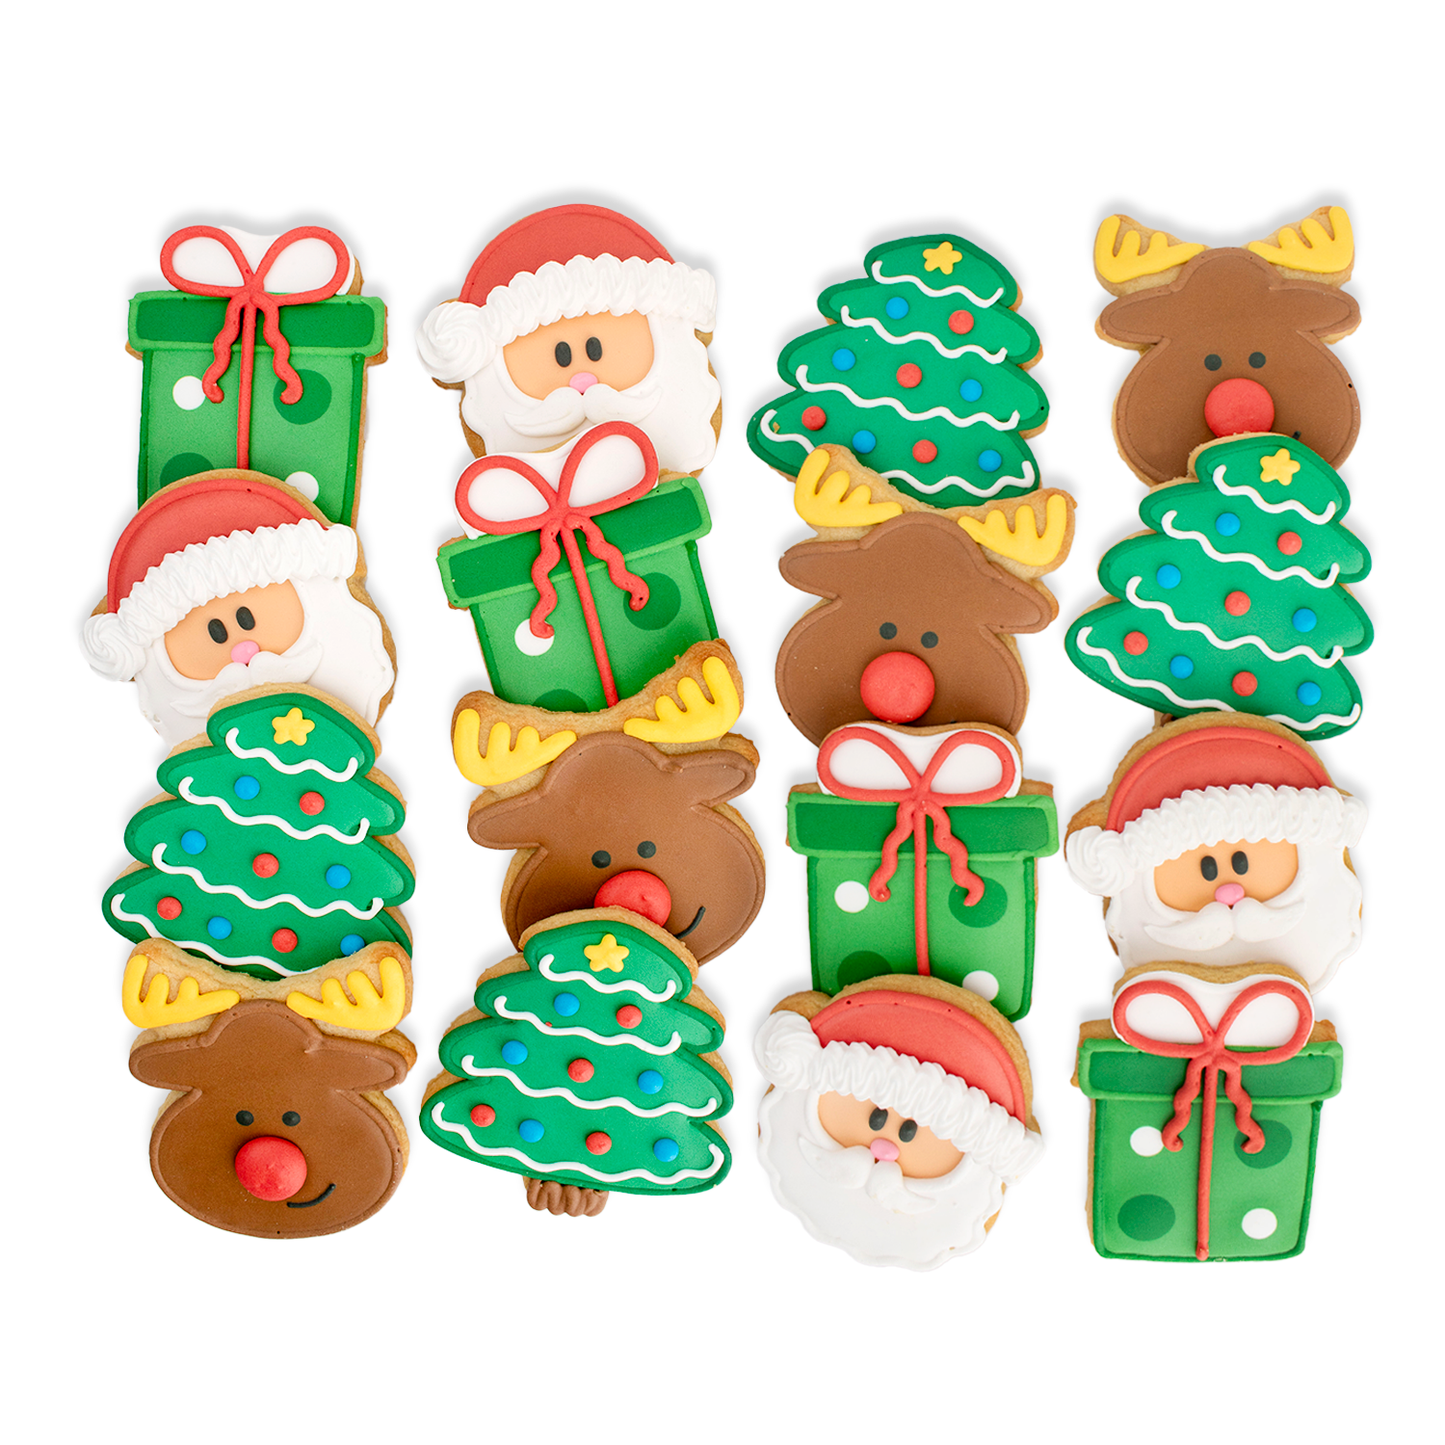 Christmas Hand-Decorated Cookies - 16 ct